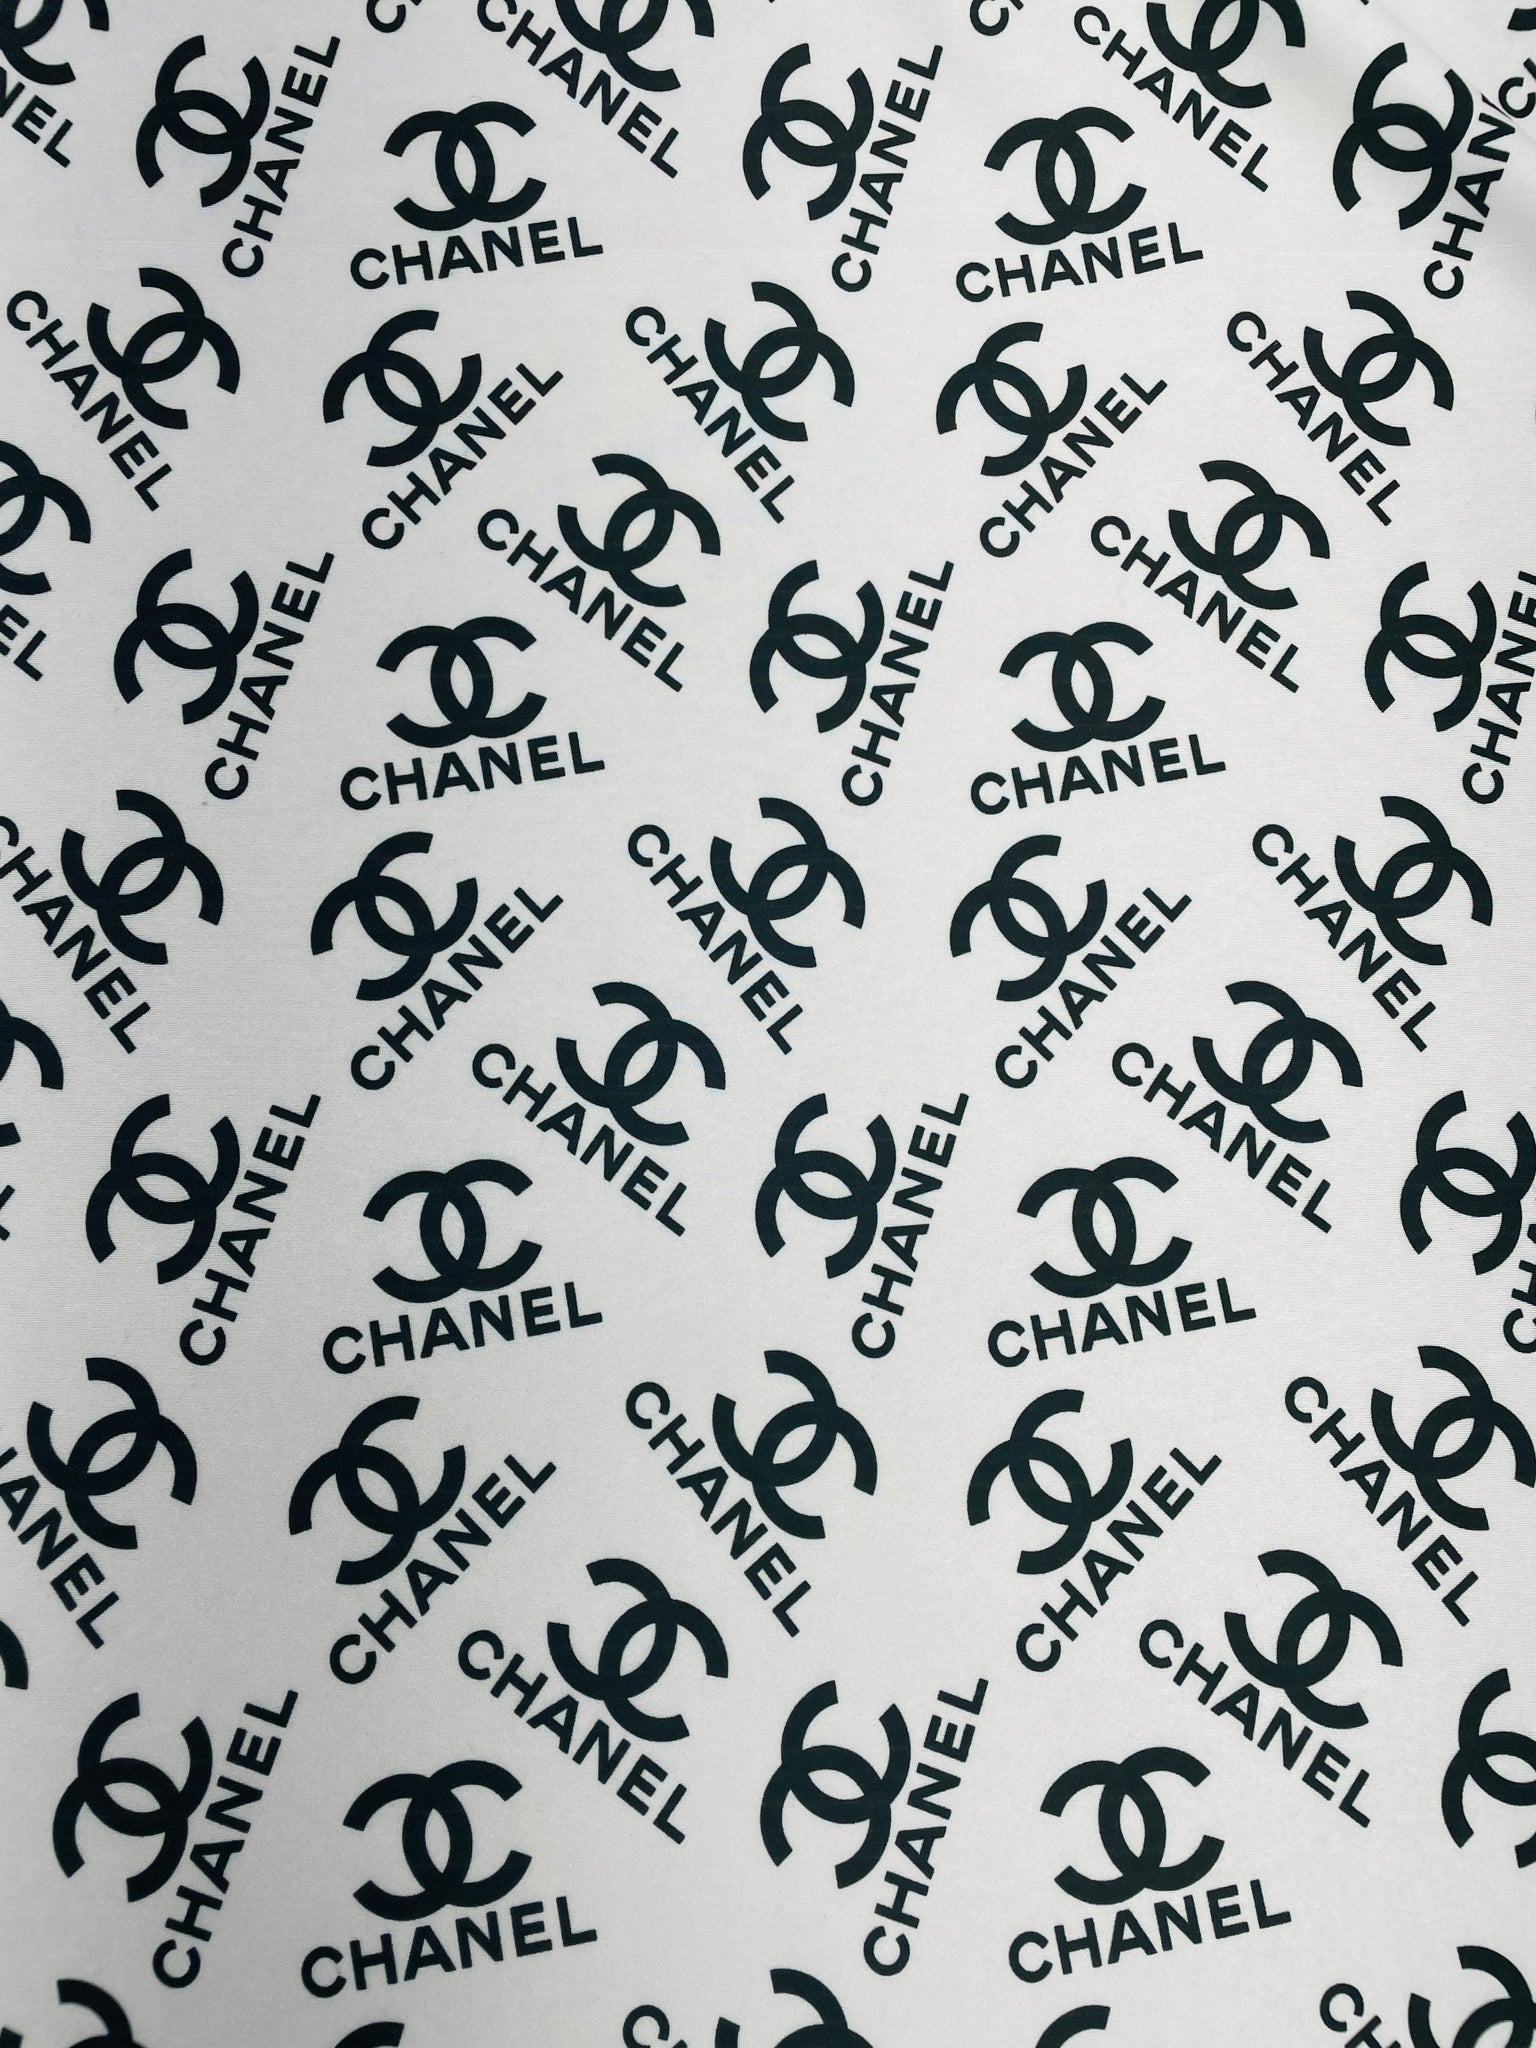 Chanel - Floral branding package with frame - Sias Studio